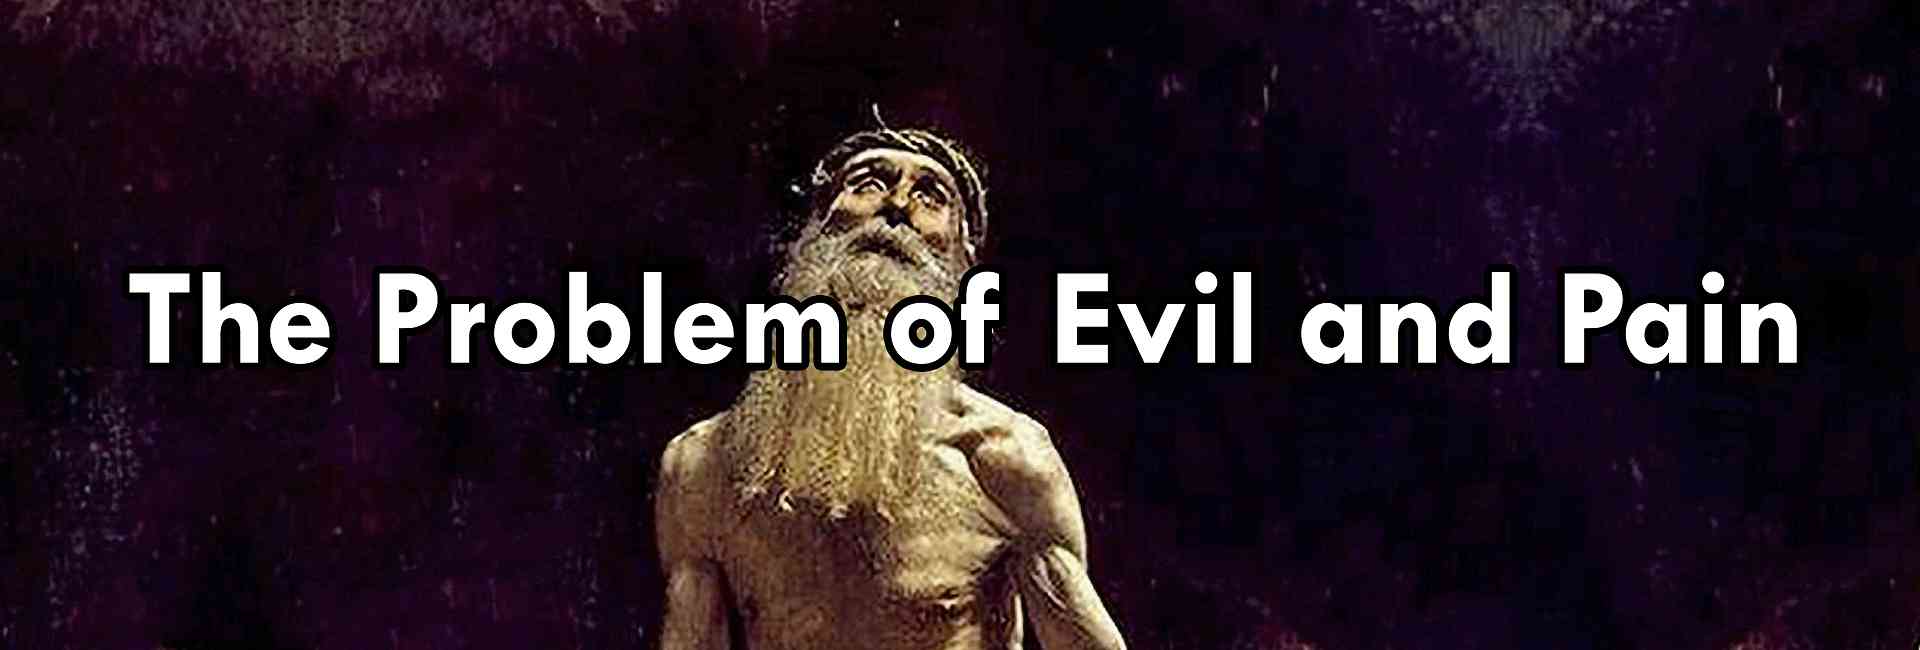 Problem of Evil and Pain, The